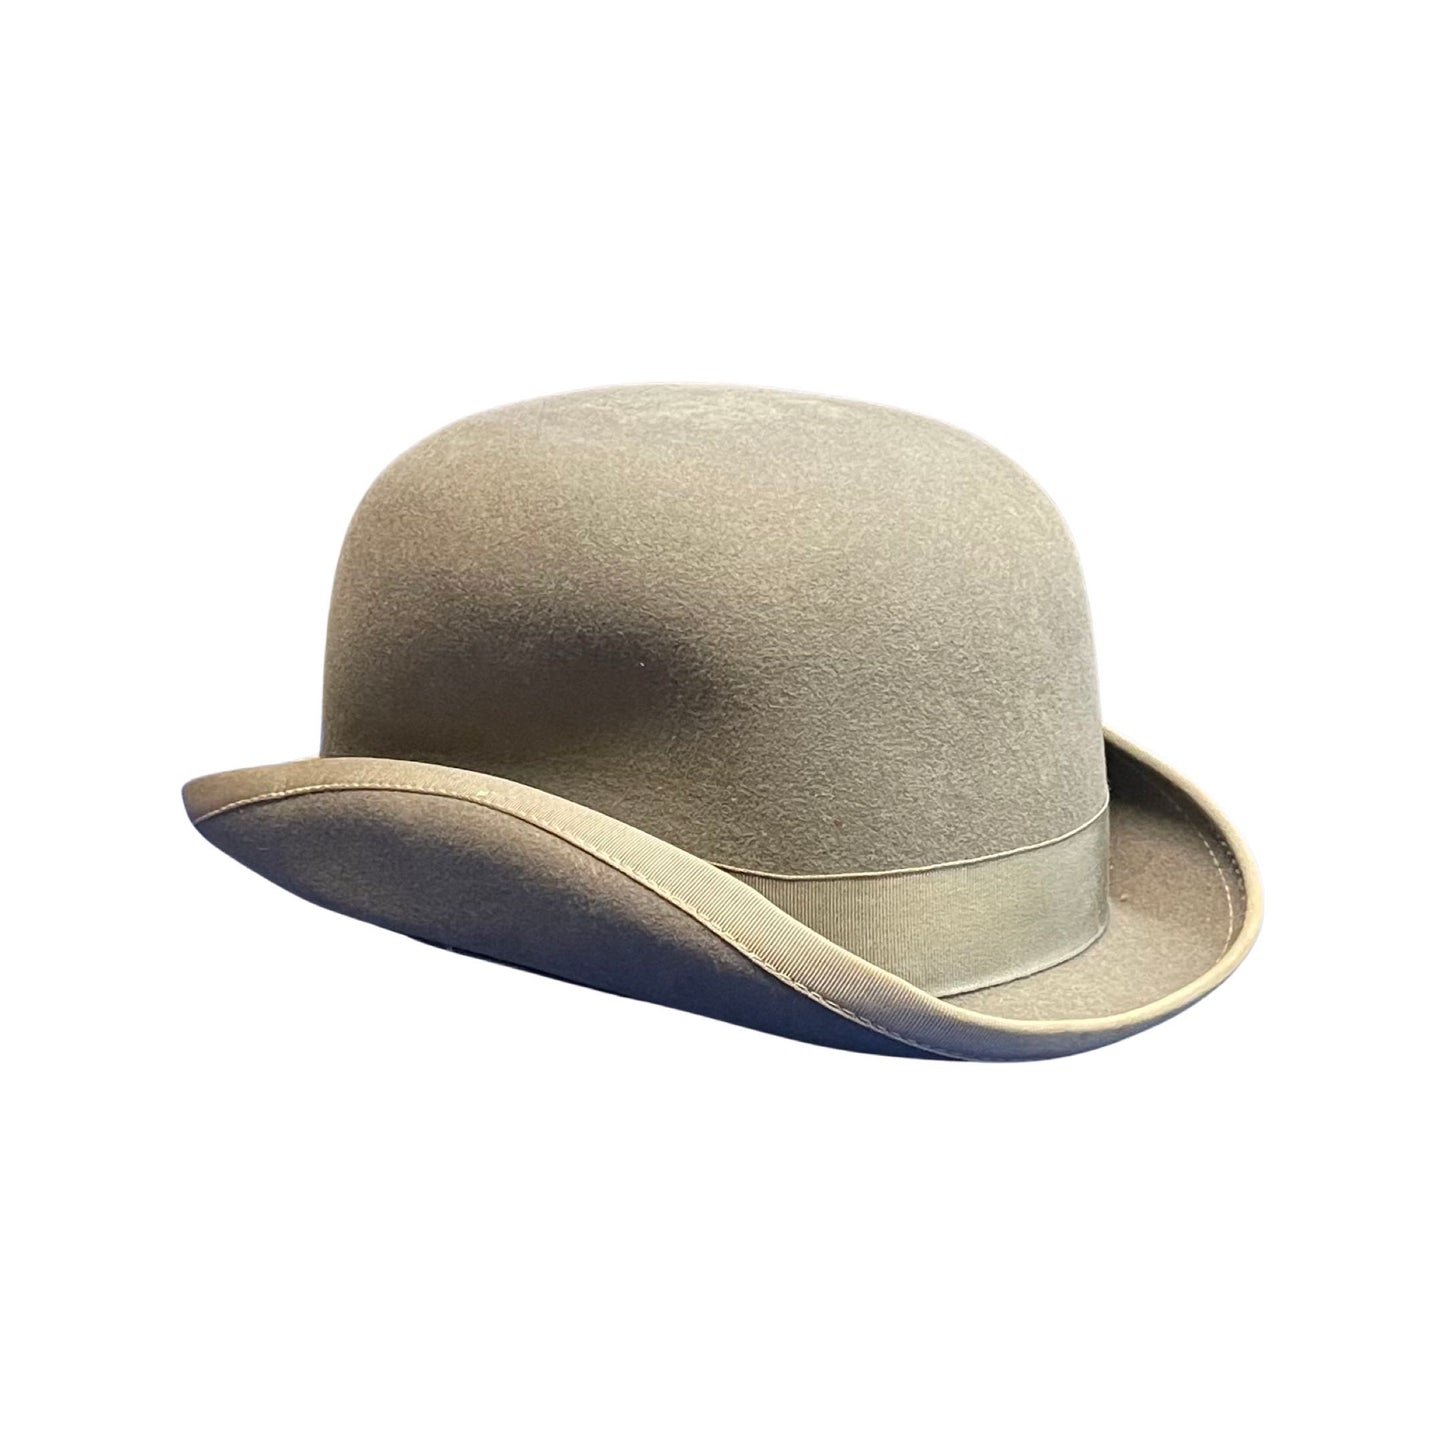 Derby Taupe size 7